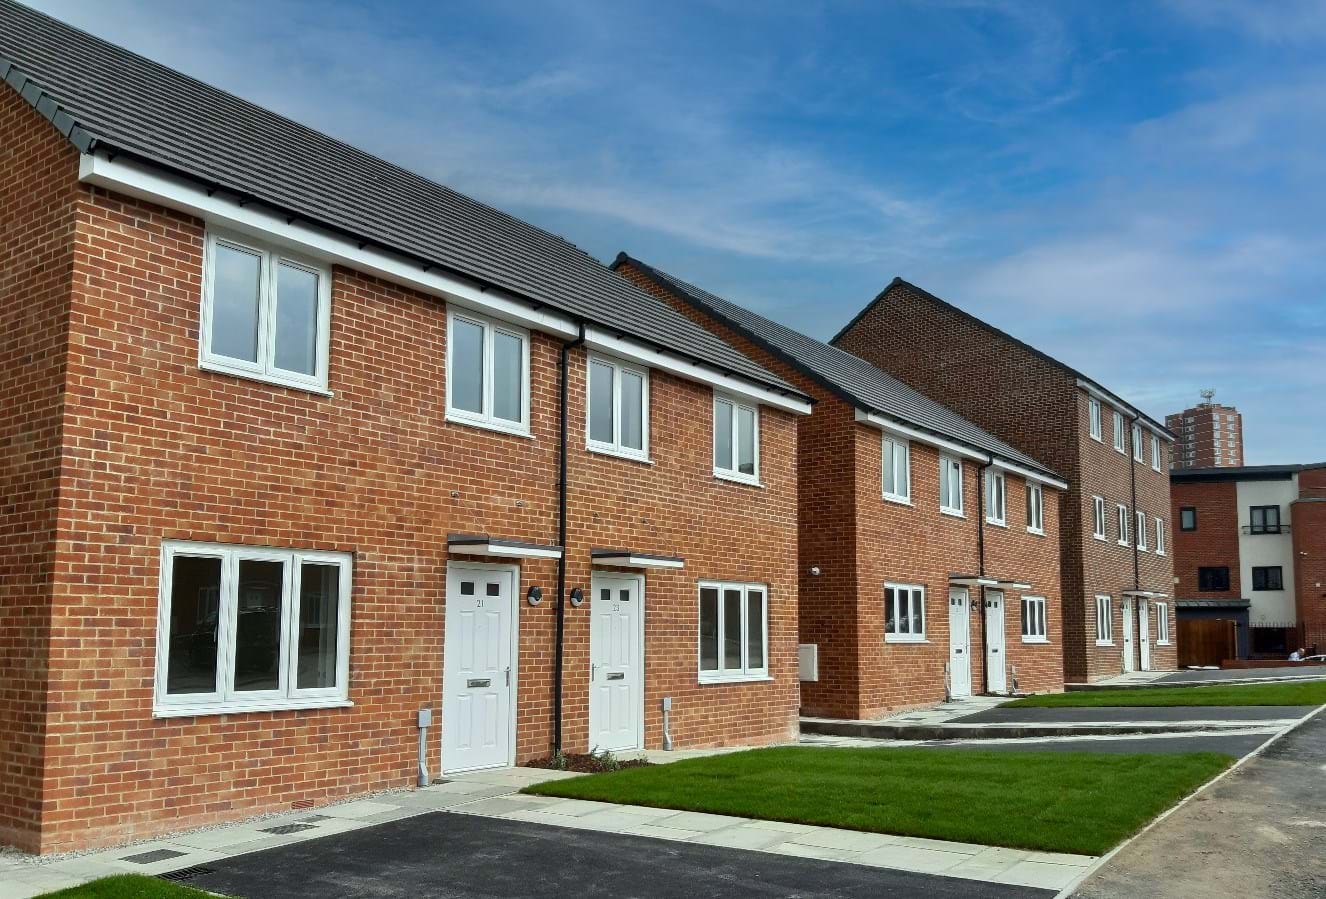 45 affordable new homes have been completed at the Suthers Court development in Werneth